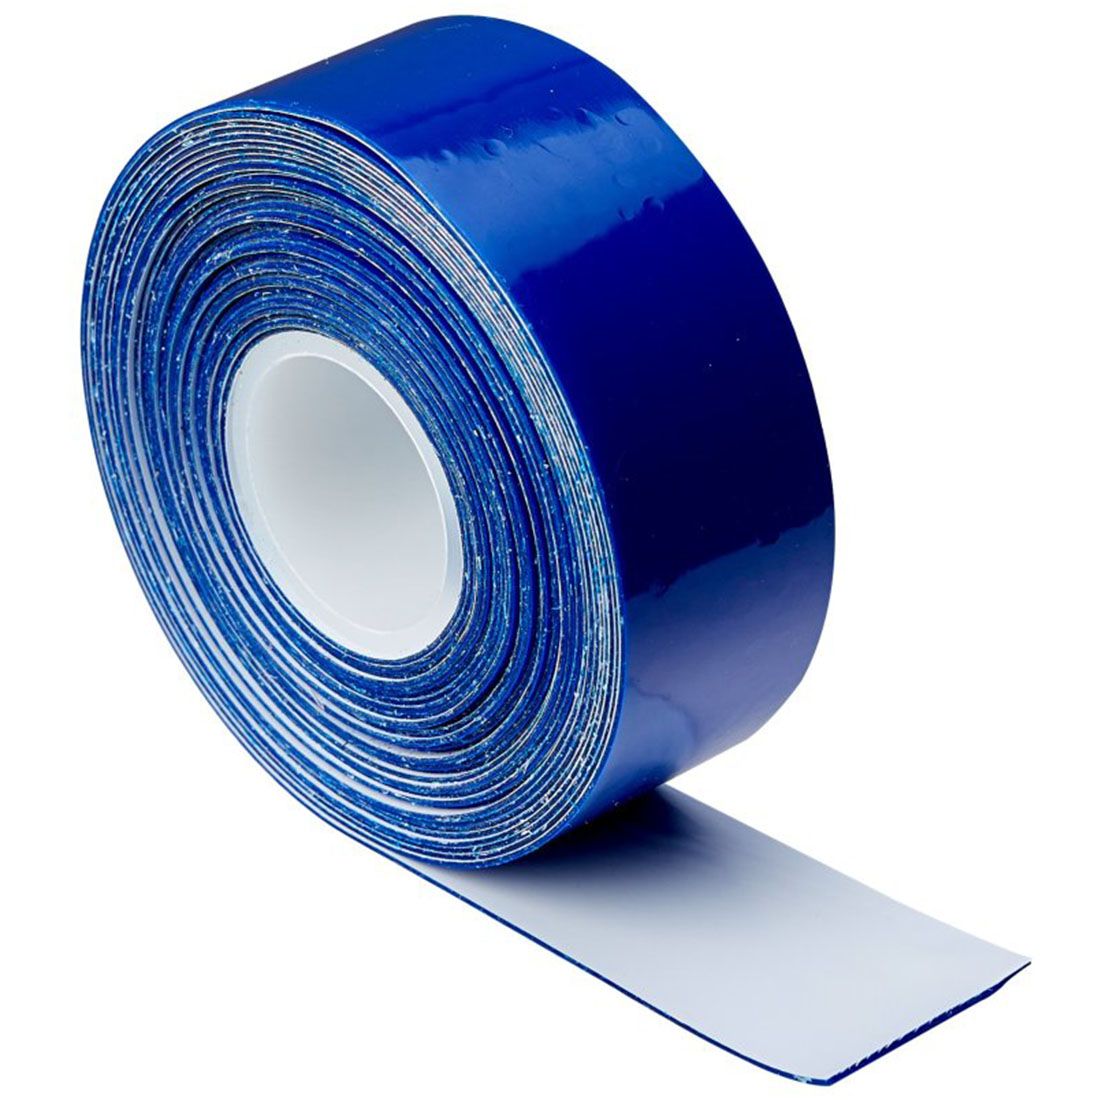 3M™ 1500171 DBI-SALA® 1 x 216 Quick Wrap Tape II, Blue, Resists Tears  Better, Stretches Further by 3M™ Fall Protection